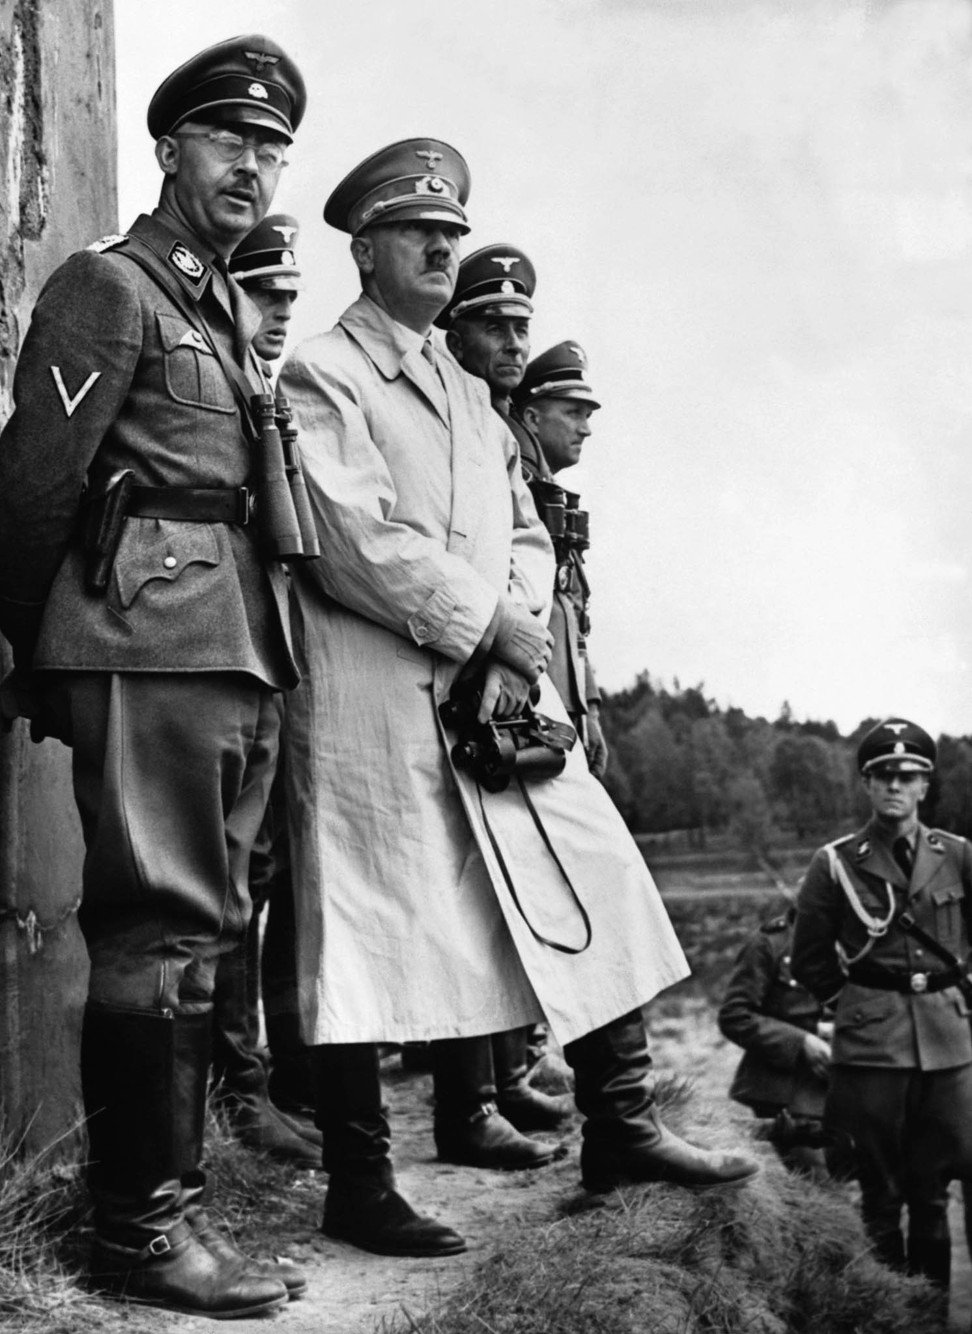 The only person who outranked Himmler in the Nazi hierarchy was Hitler himself. File photo: Reuters